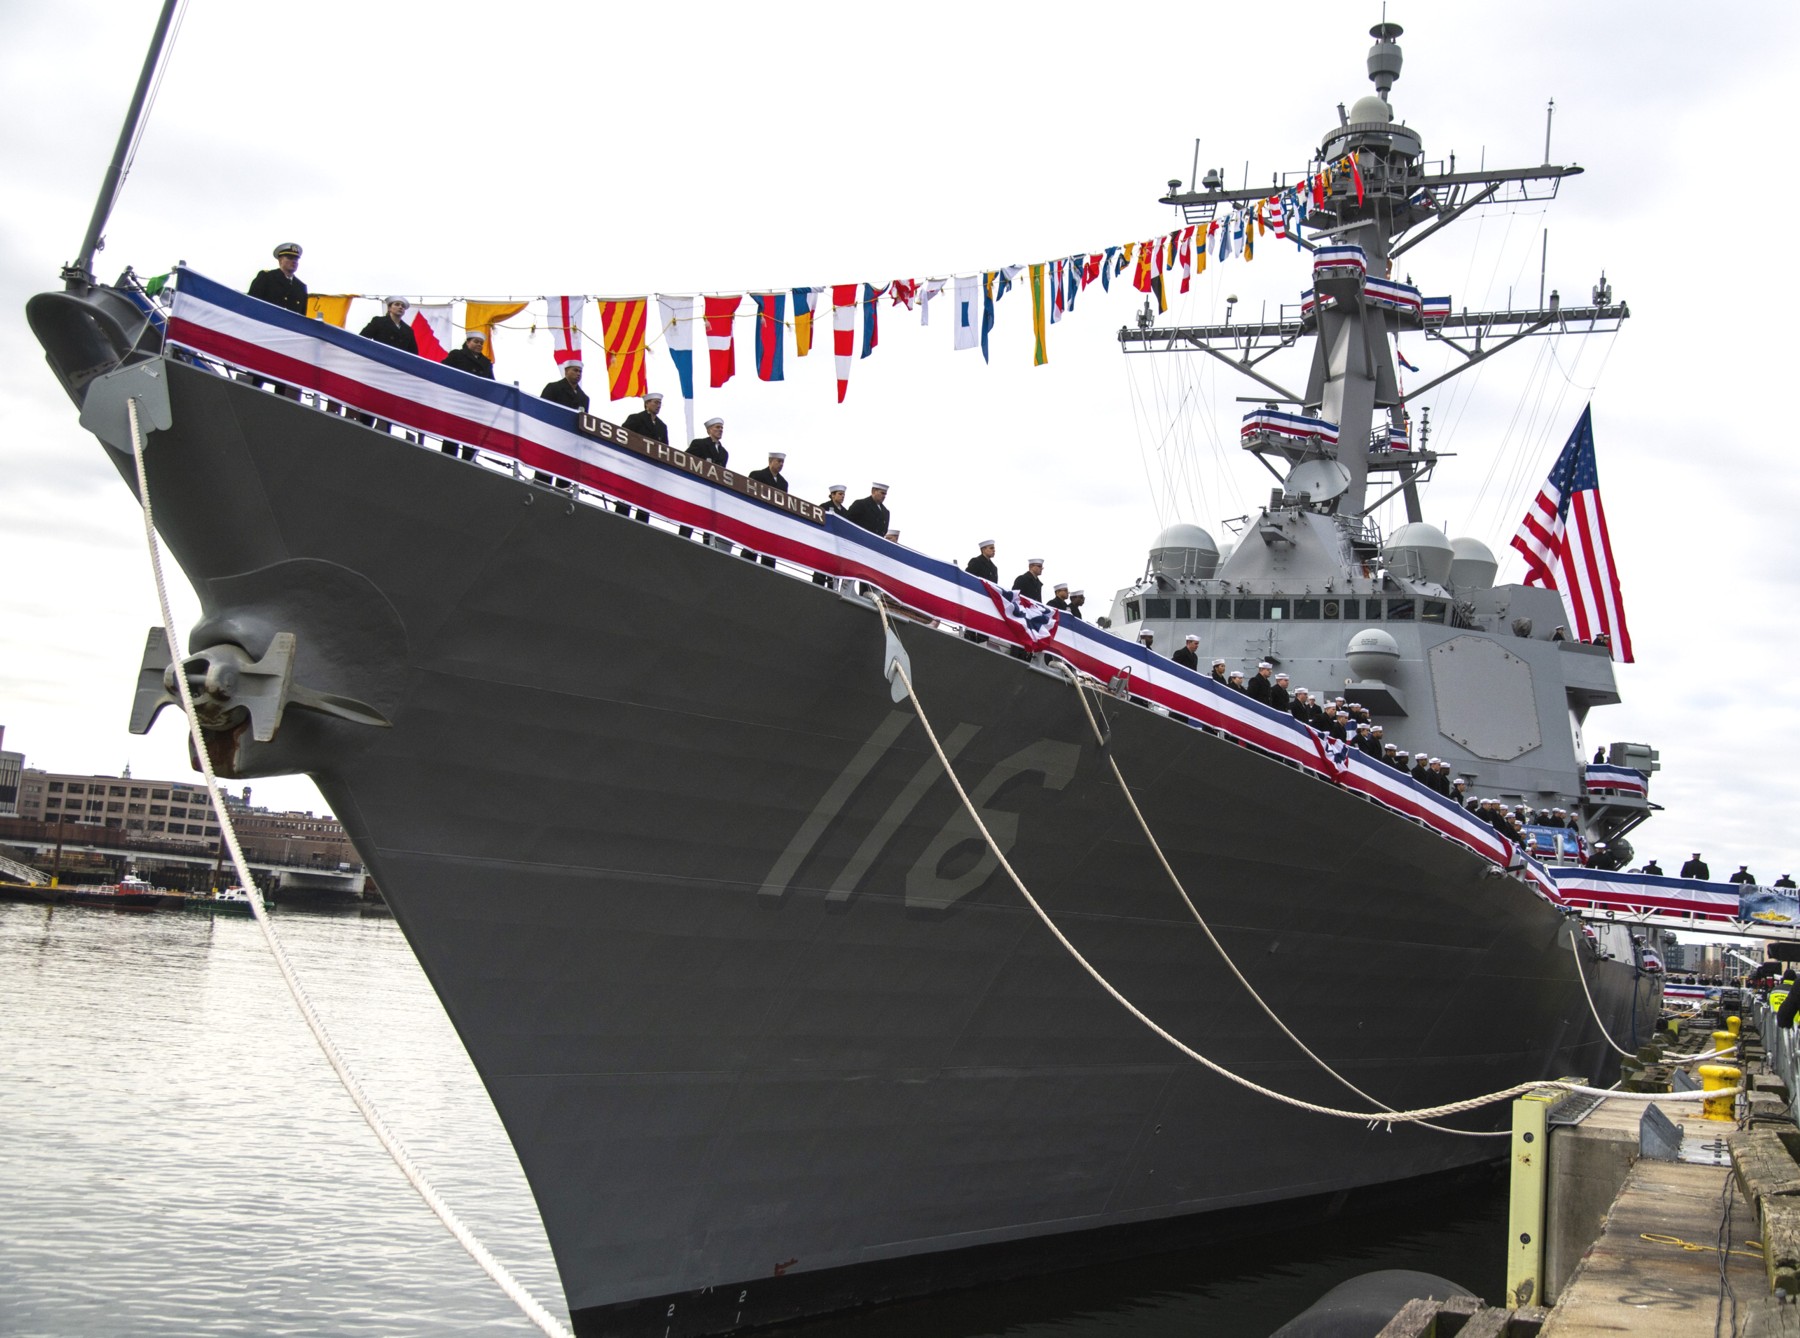 ddg-116 uss thomas hudner arleigh burke class guided missile destroyer us navy aegis 27 commissioning ceremony boston